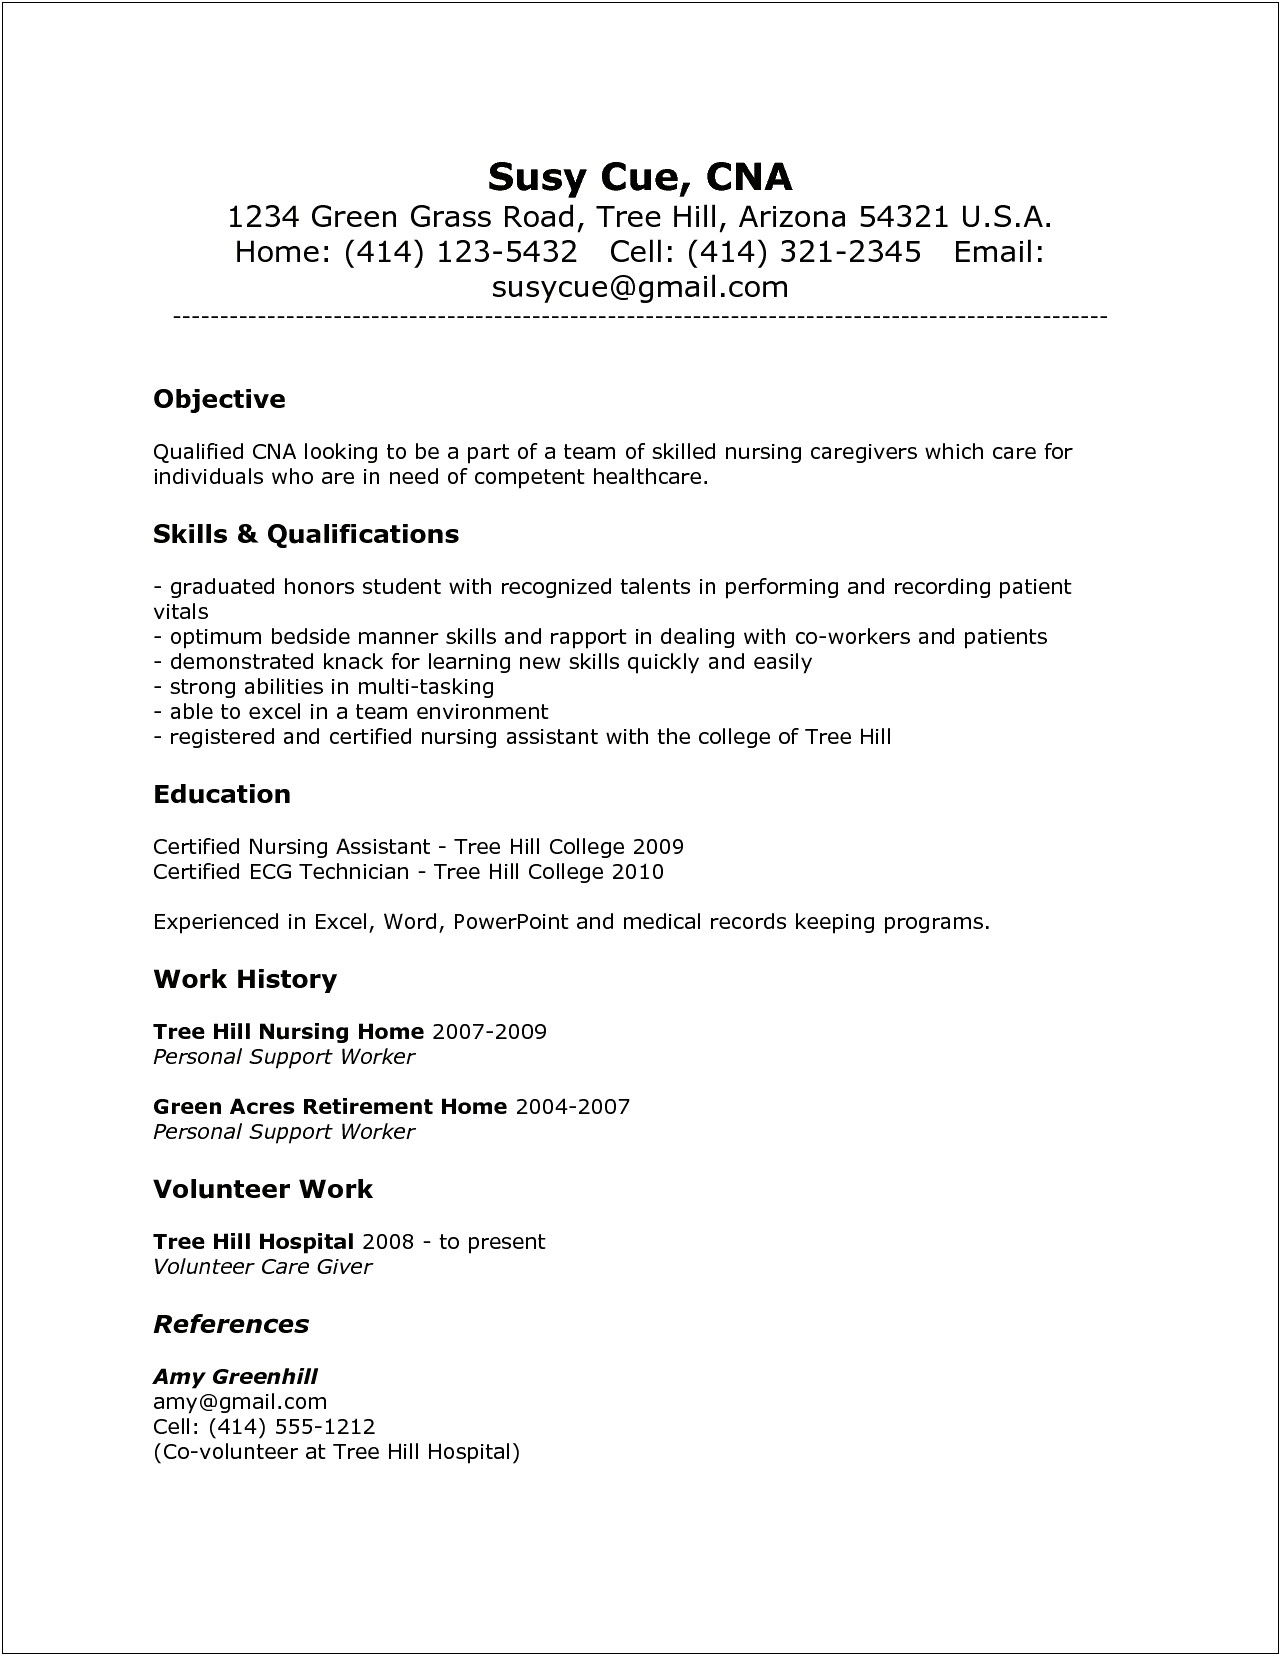 Sample Resumes For College Students Applying For Cnas